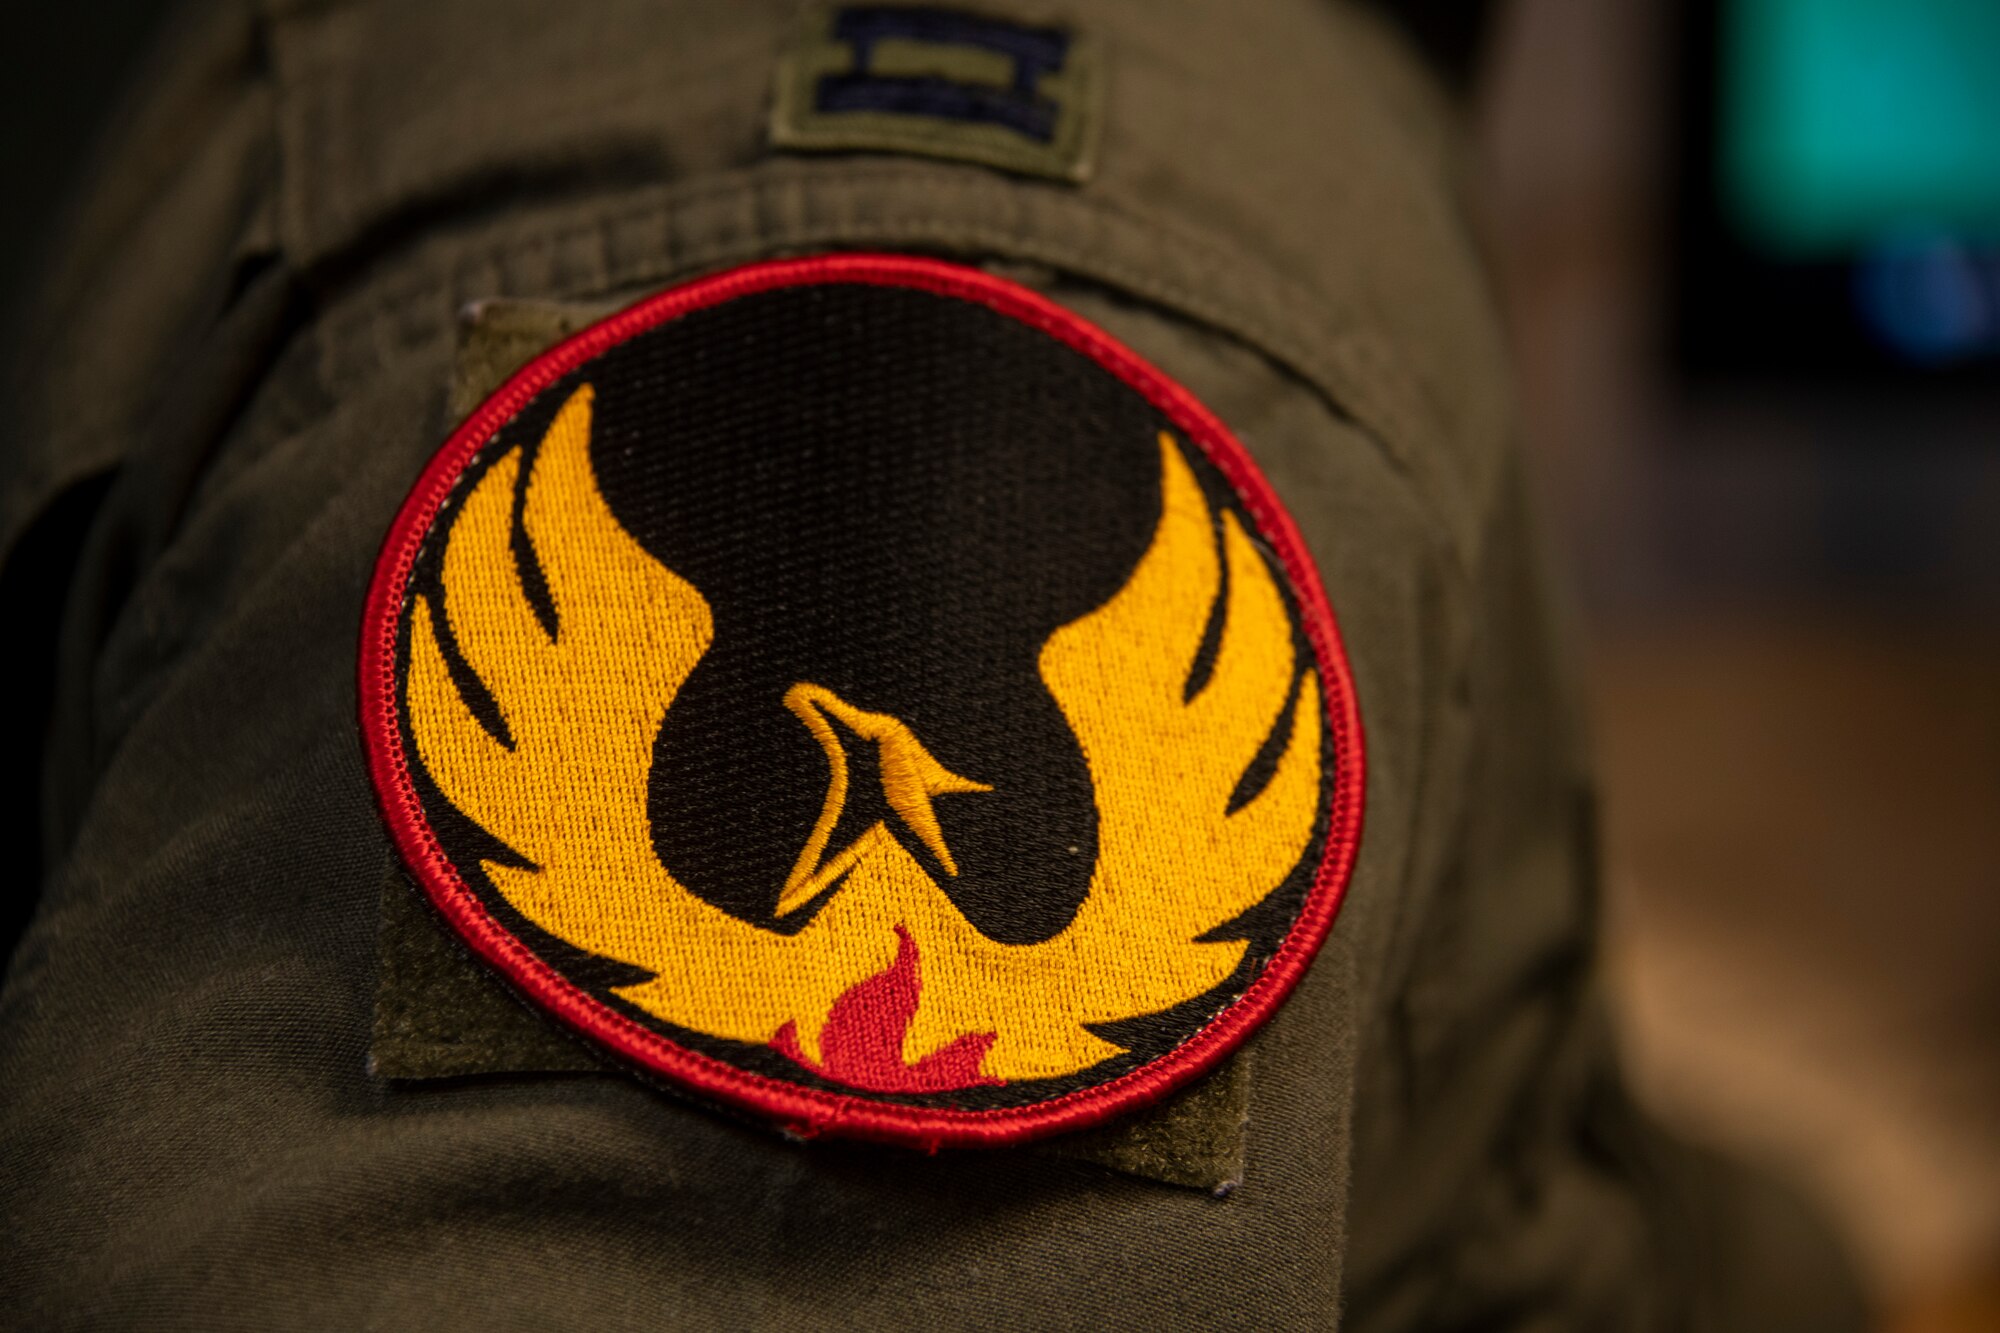 The 60th Air Mobility Wing Phoenix Spark innovation cell patch is attached to the right shoulder of U.S. Air Force Capt. Christopher Williston’s flight suit May 20, 2020, at Travis Air Force Base, California. Williston is a 21st Airlift Squadron C-17 Globemaster III pilot and the deputy chief of the innovation cell. He helped organize a commercial solutions offering event with the 60th Contracting Squadron so companies could provide innovate solutions to enhance the Travis AFB mission. (U.S. Air Force photo by Tech. Sgt. James Hodgman)